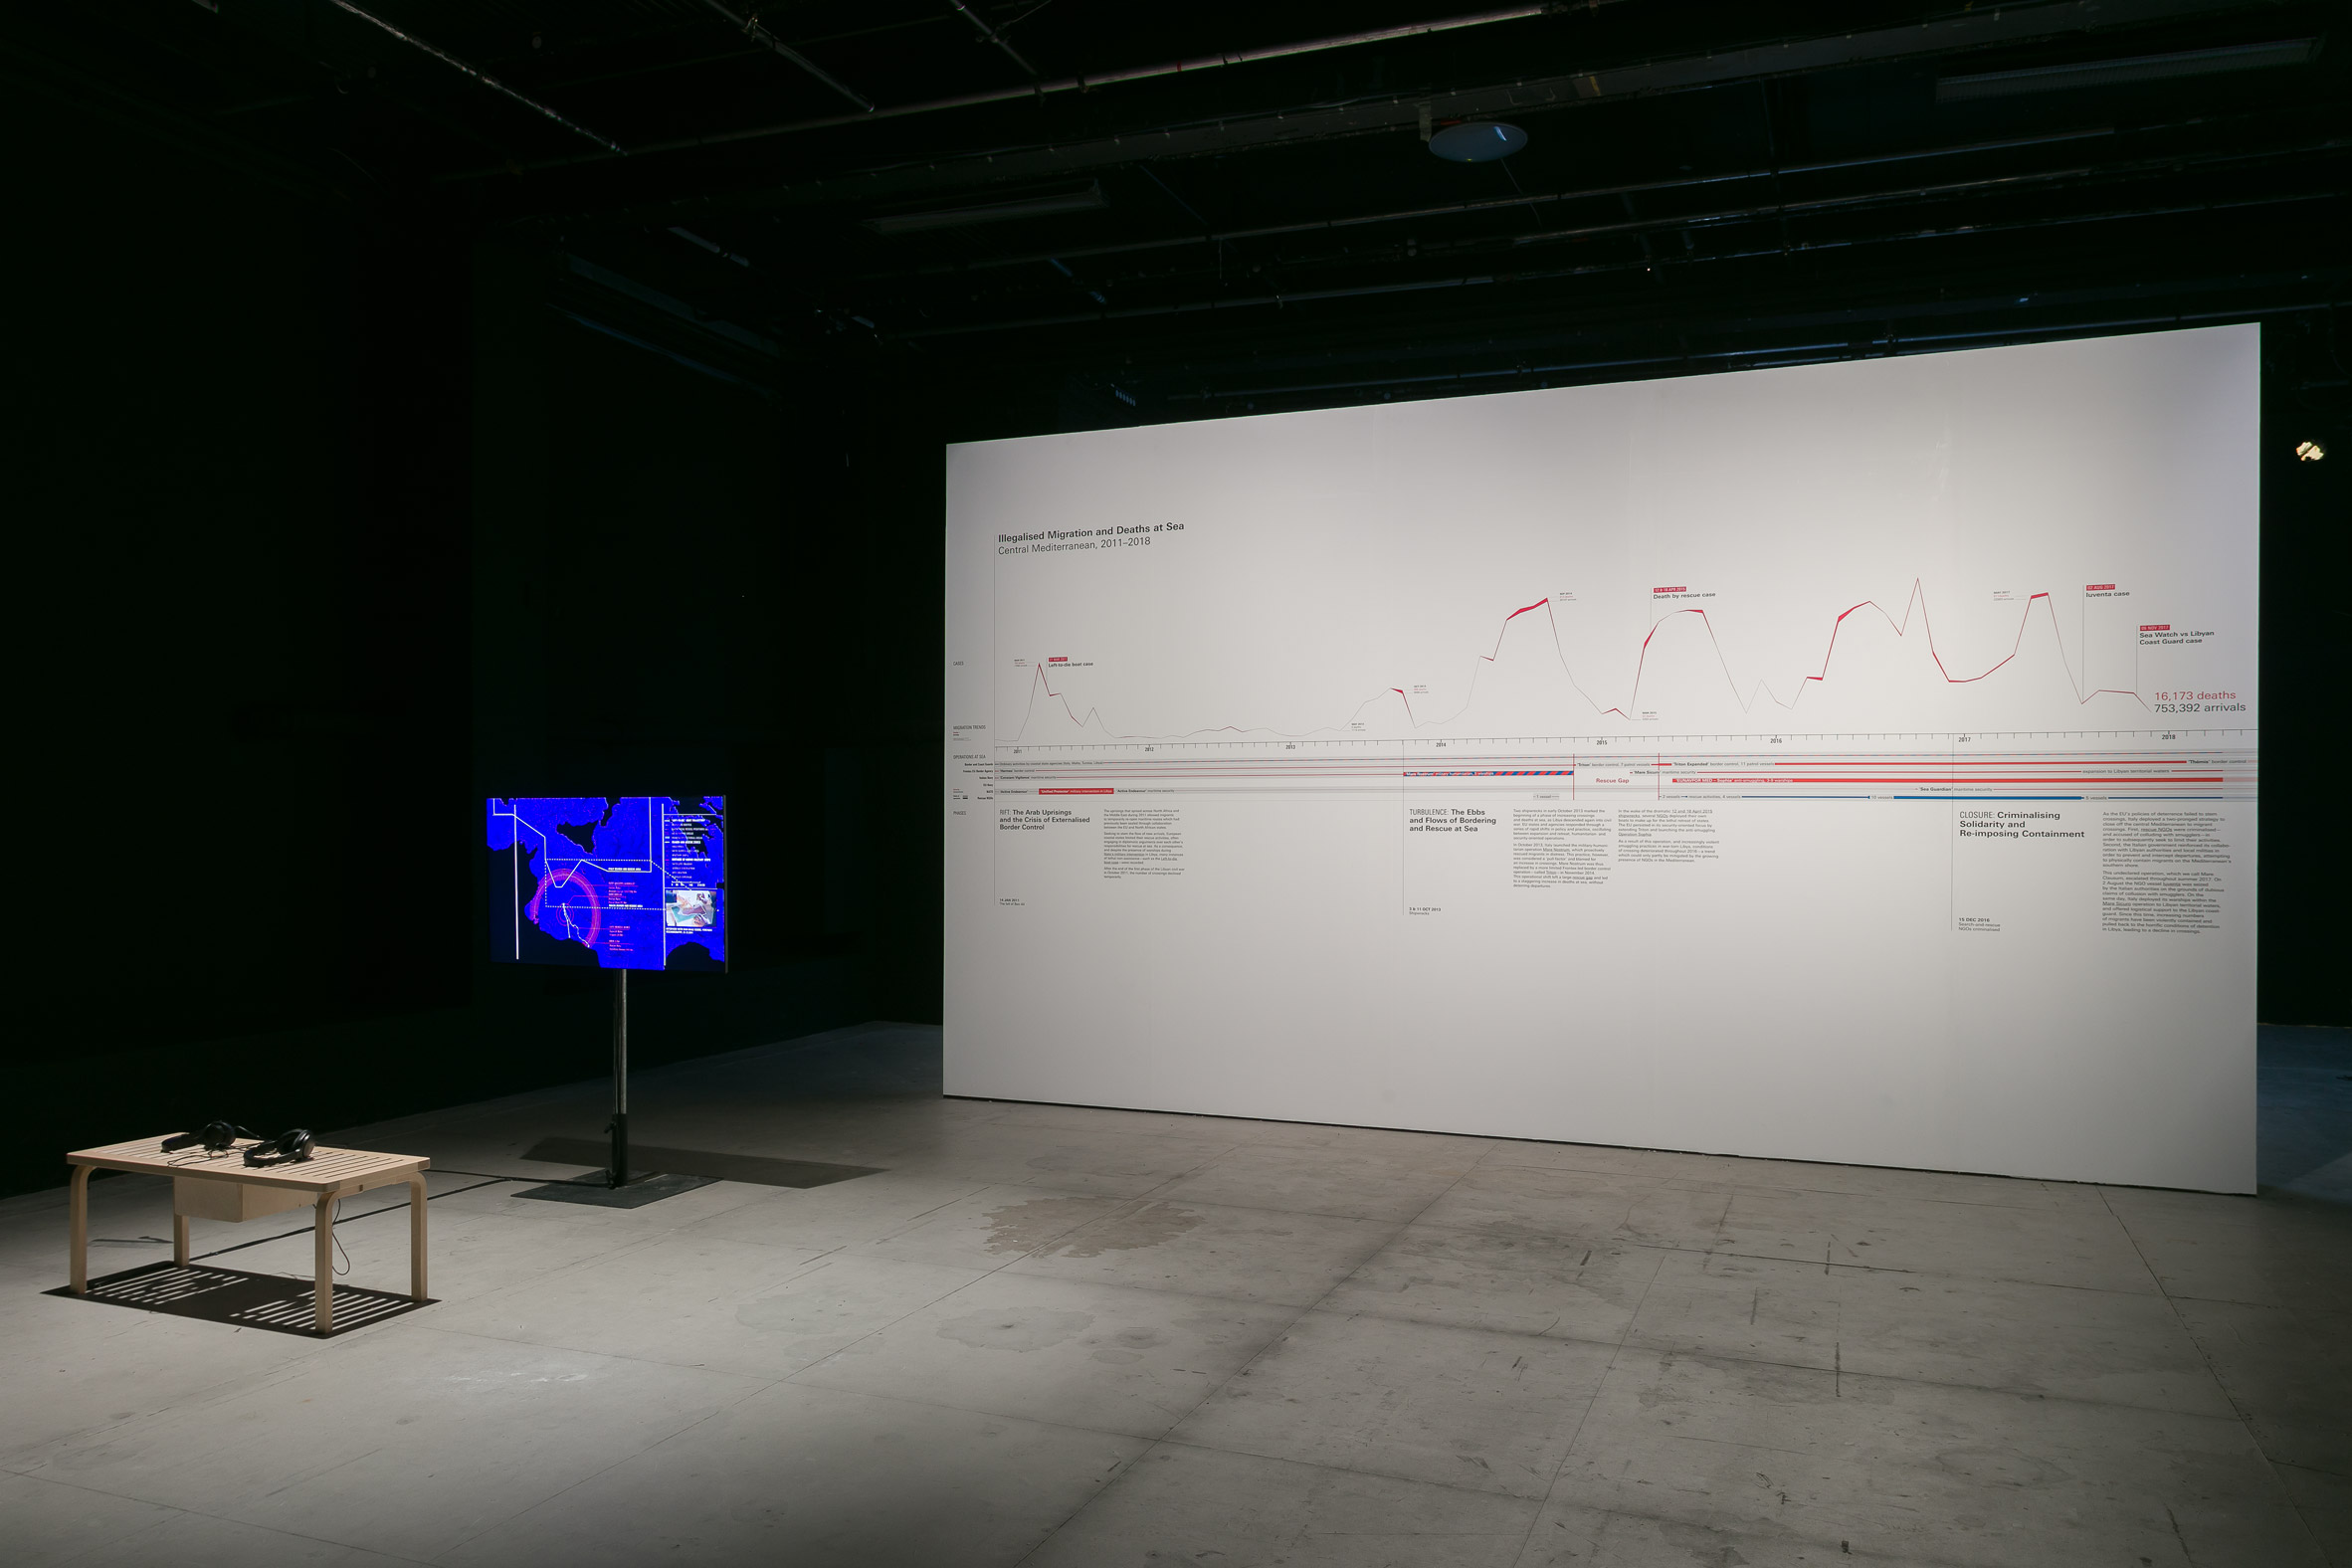 Counter Investigations exhibition by Forensic Architecture wins Design of the Year 2018